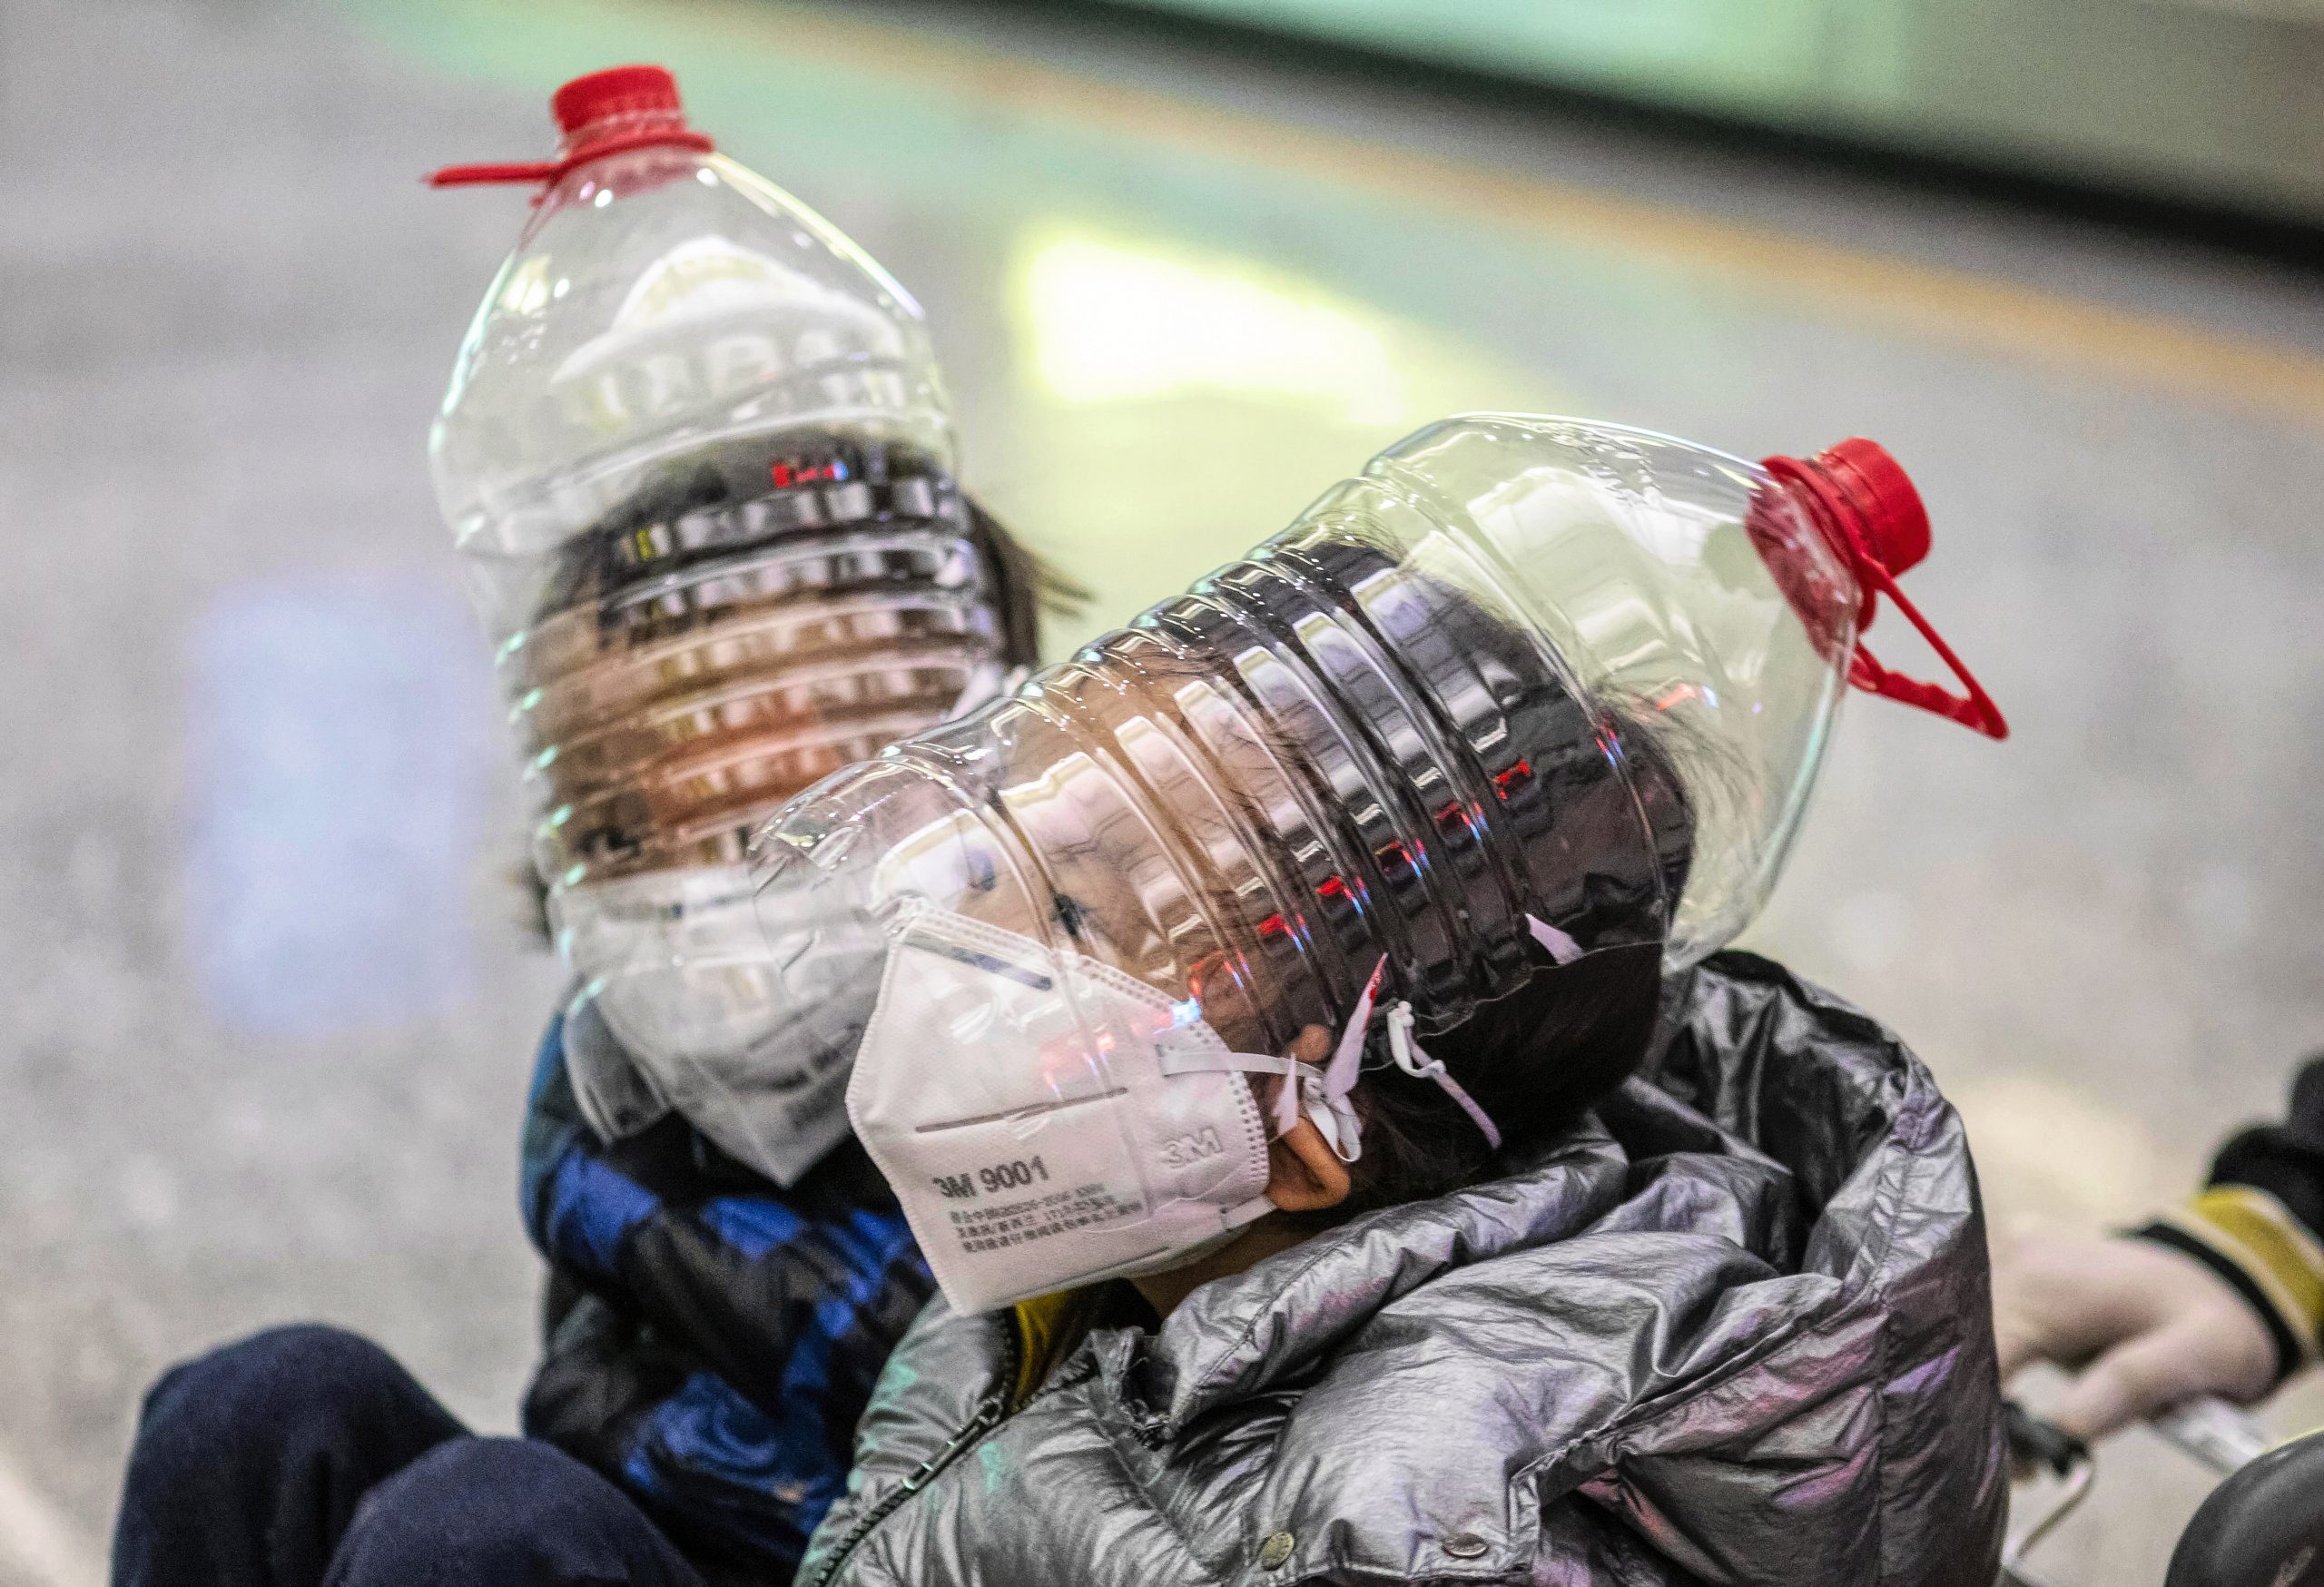 epa08185830 Childrean wear an improvised face protection made from water bottles in order to protect against the coronavirus at the airport arrival terminal in Guangzhou, Guangdong Province, China, 01 February 2020. Guangzhou Airport, usually busy during the end of Spring Festival when Chinese travelers return to their homes, appeared deserted after many countries and international airlines suspended or limited flights to and from China, because of outbreak of coronavirus in Wuhan City.  EPA/Alex Plavevski